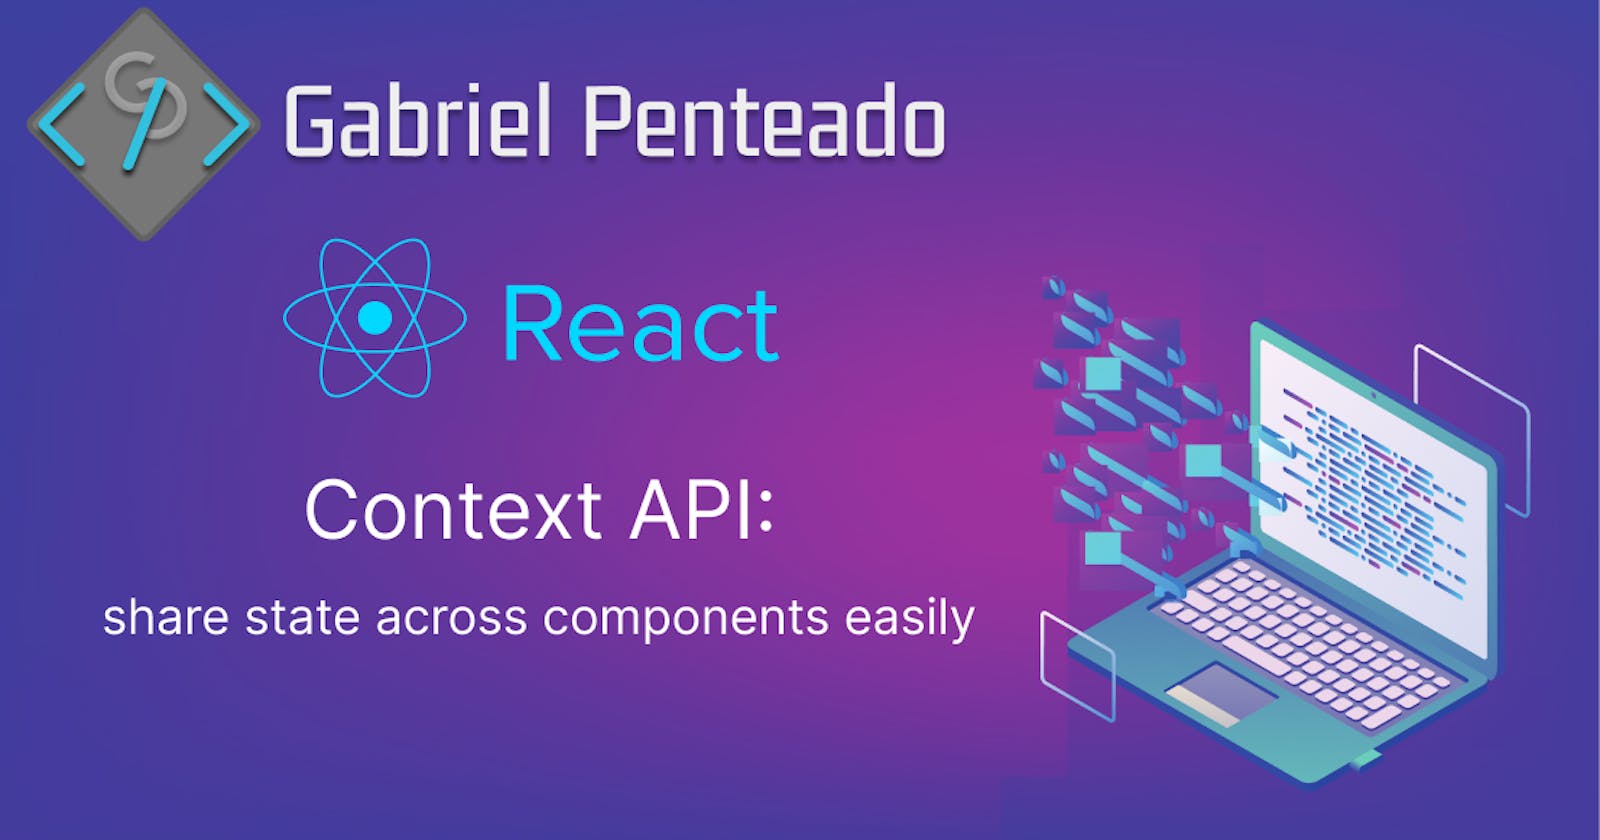 Context API : Share state across components easily.